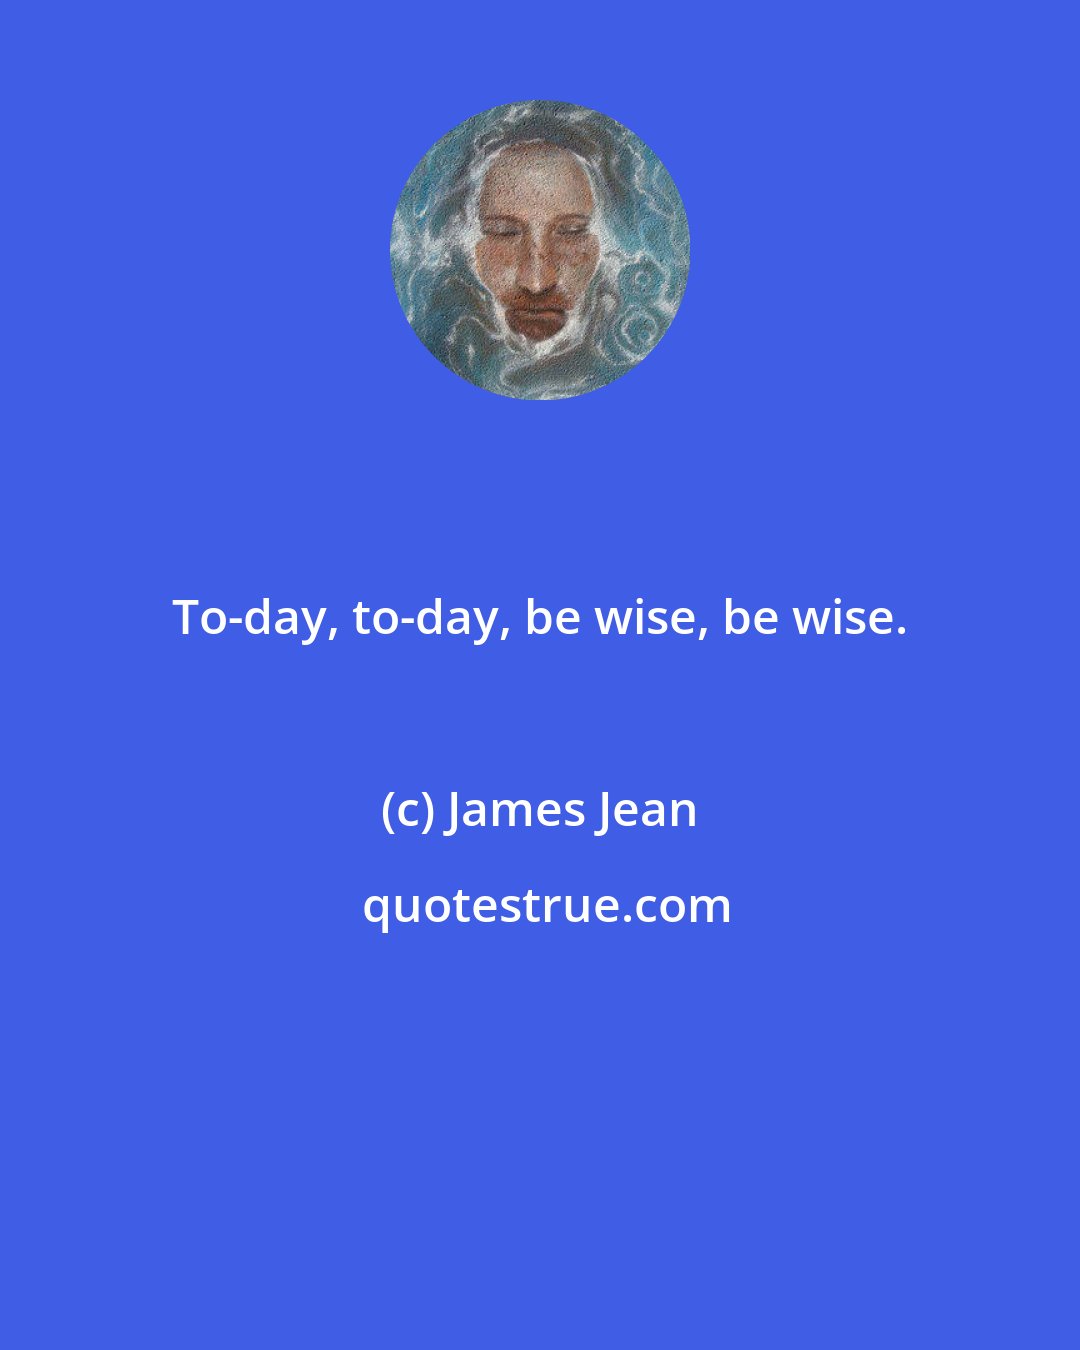 James Jean: To-day, to-day, be wise, be wise.